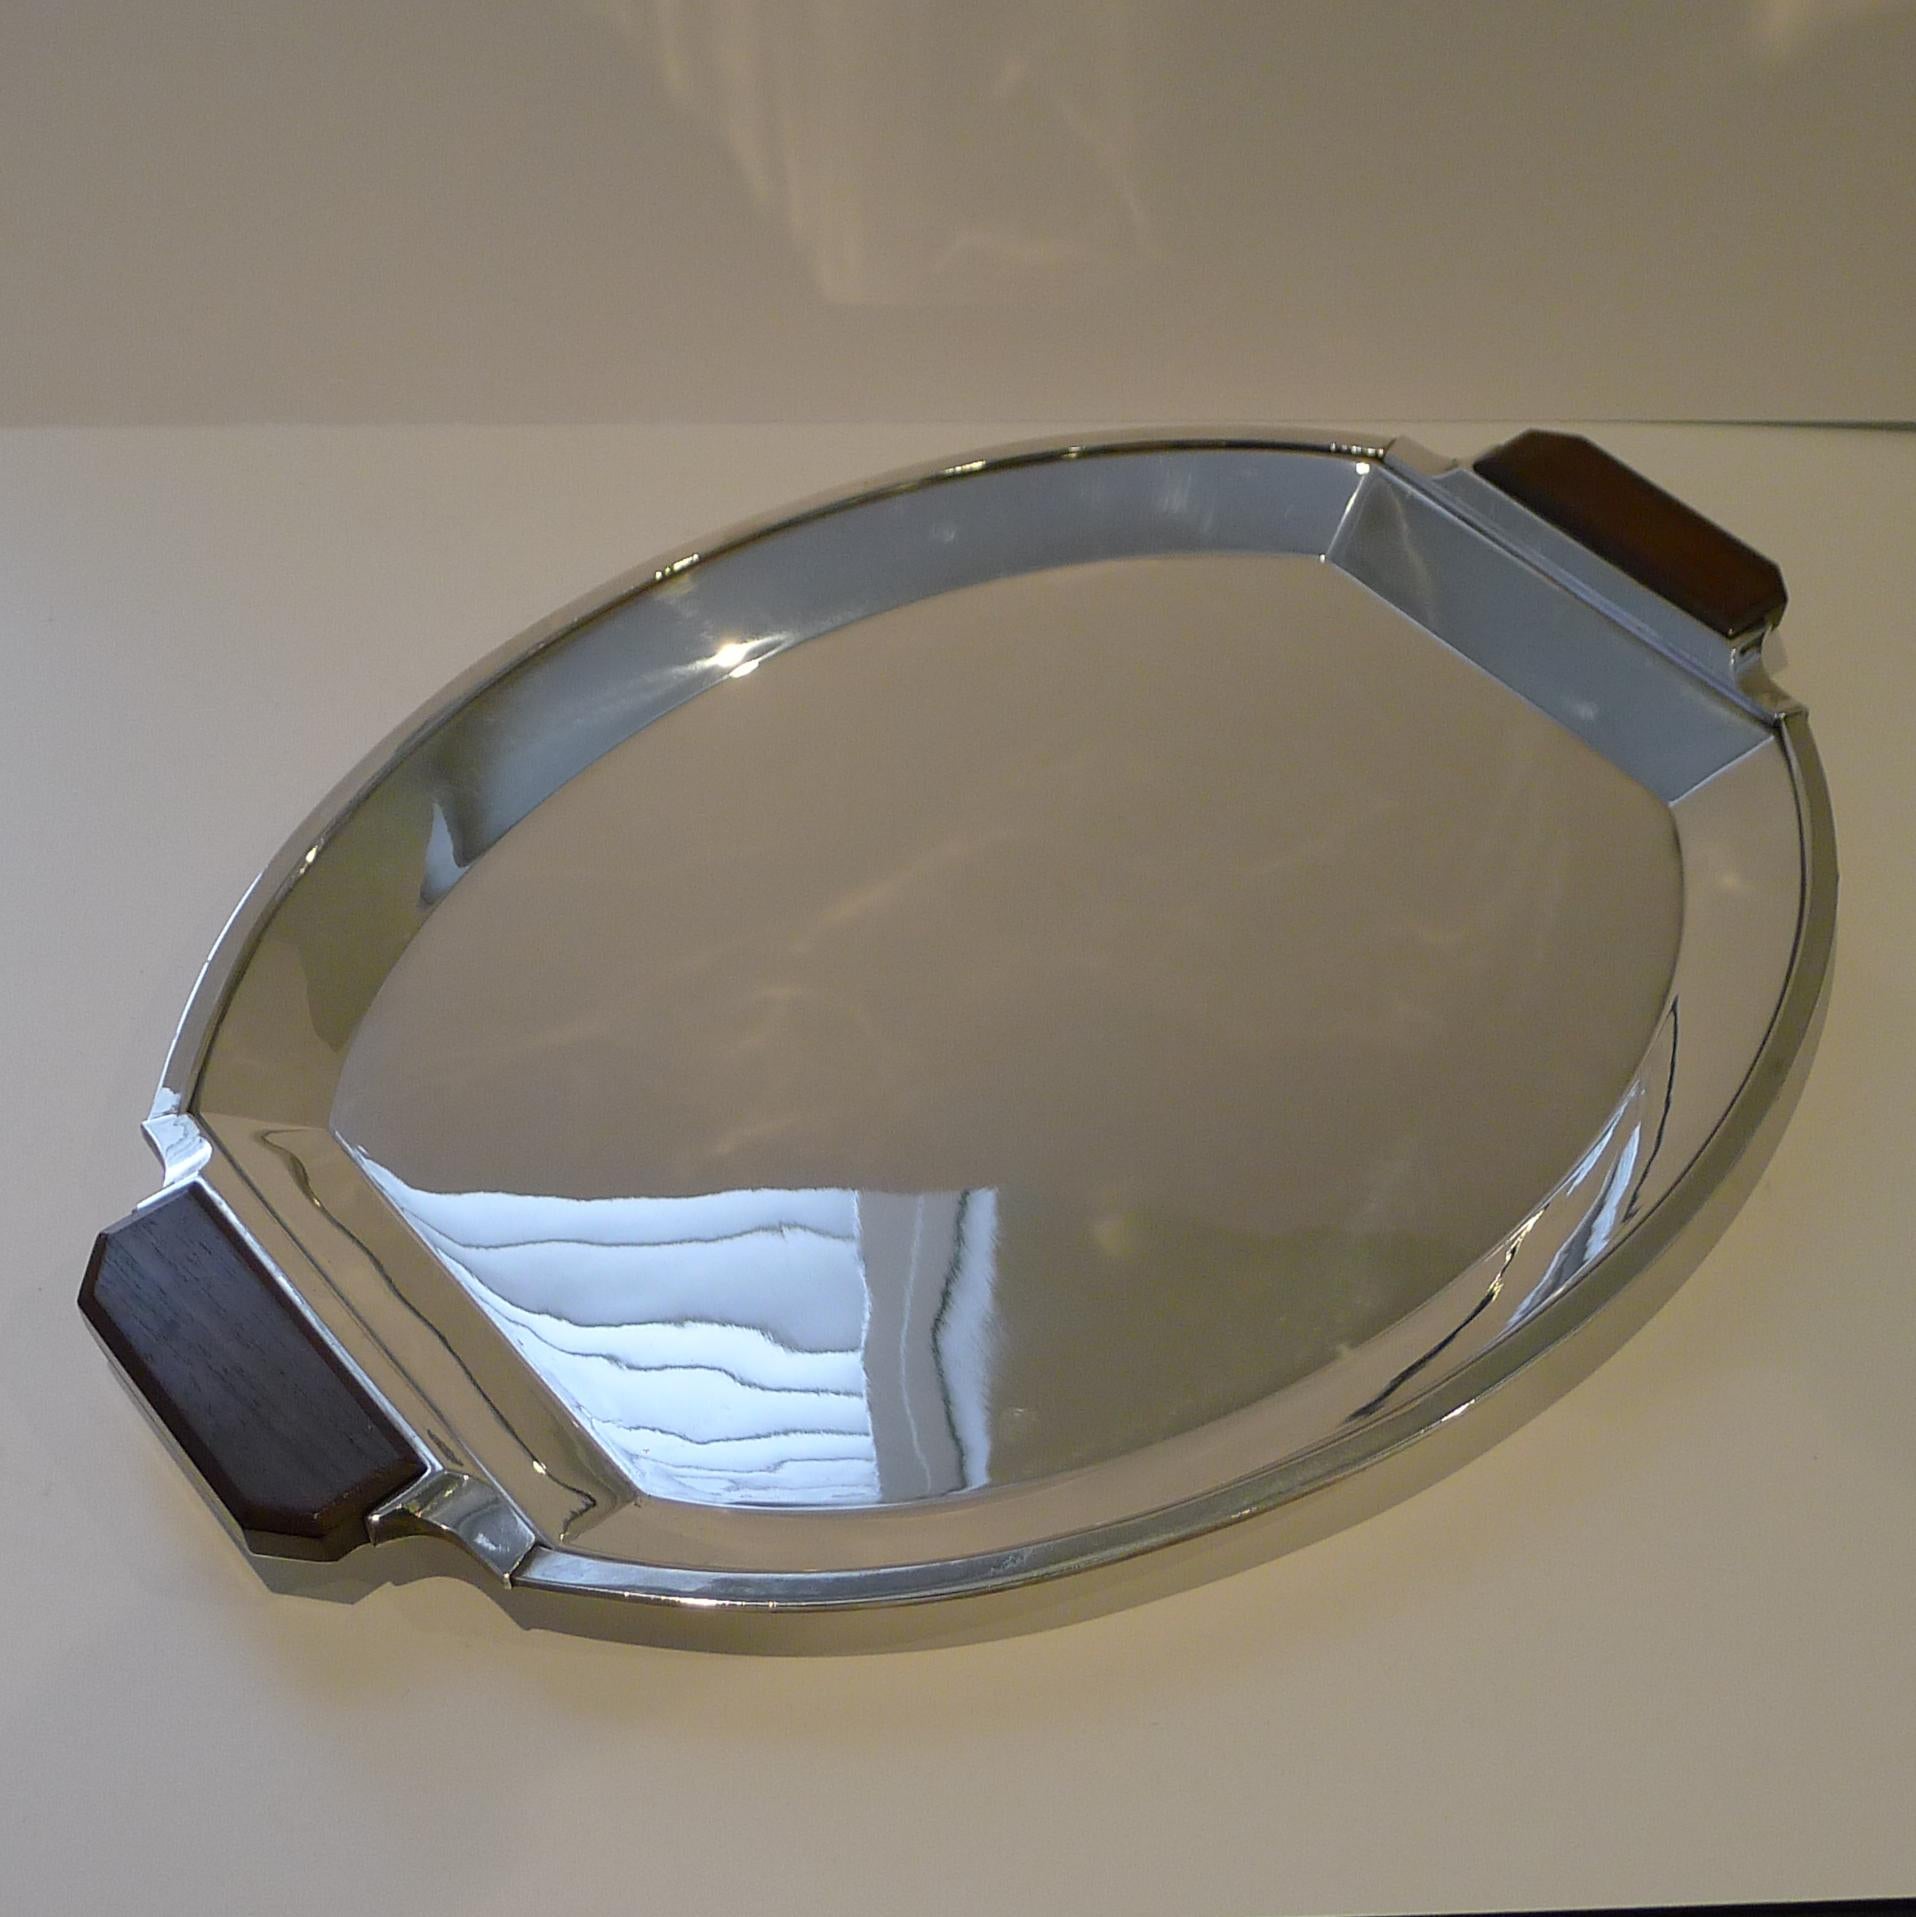 An outstanding and very stylish art deco silver plated tray by one of the world's finest silversmith's, Christofle as part of their O Gallia range between 1931-1935 based on the mark struck on the underside.

It has just returned from my